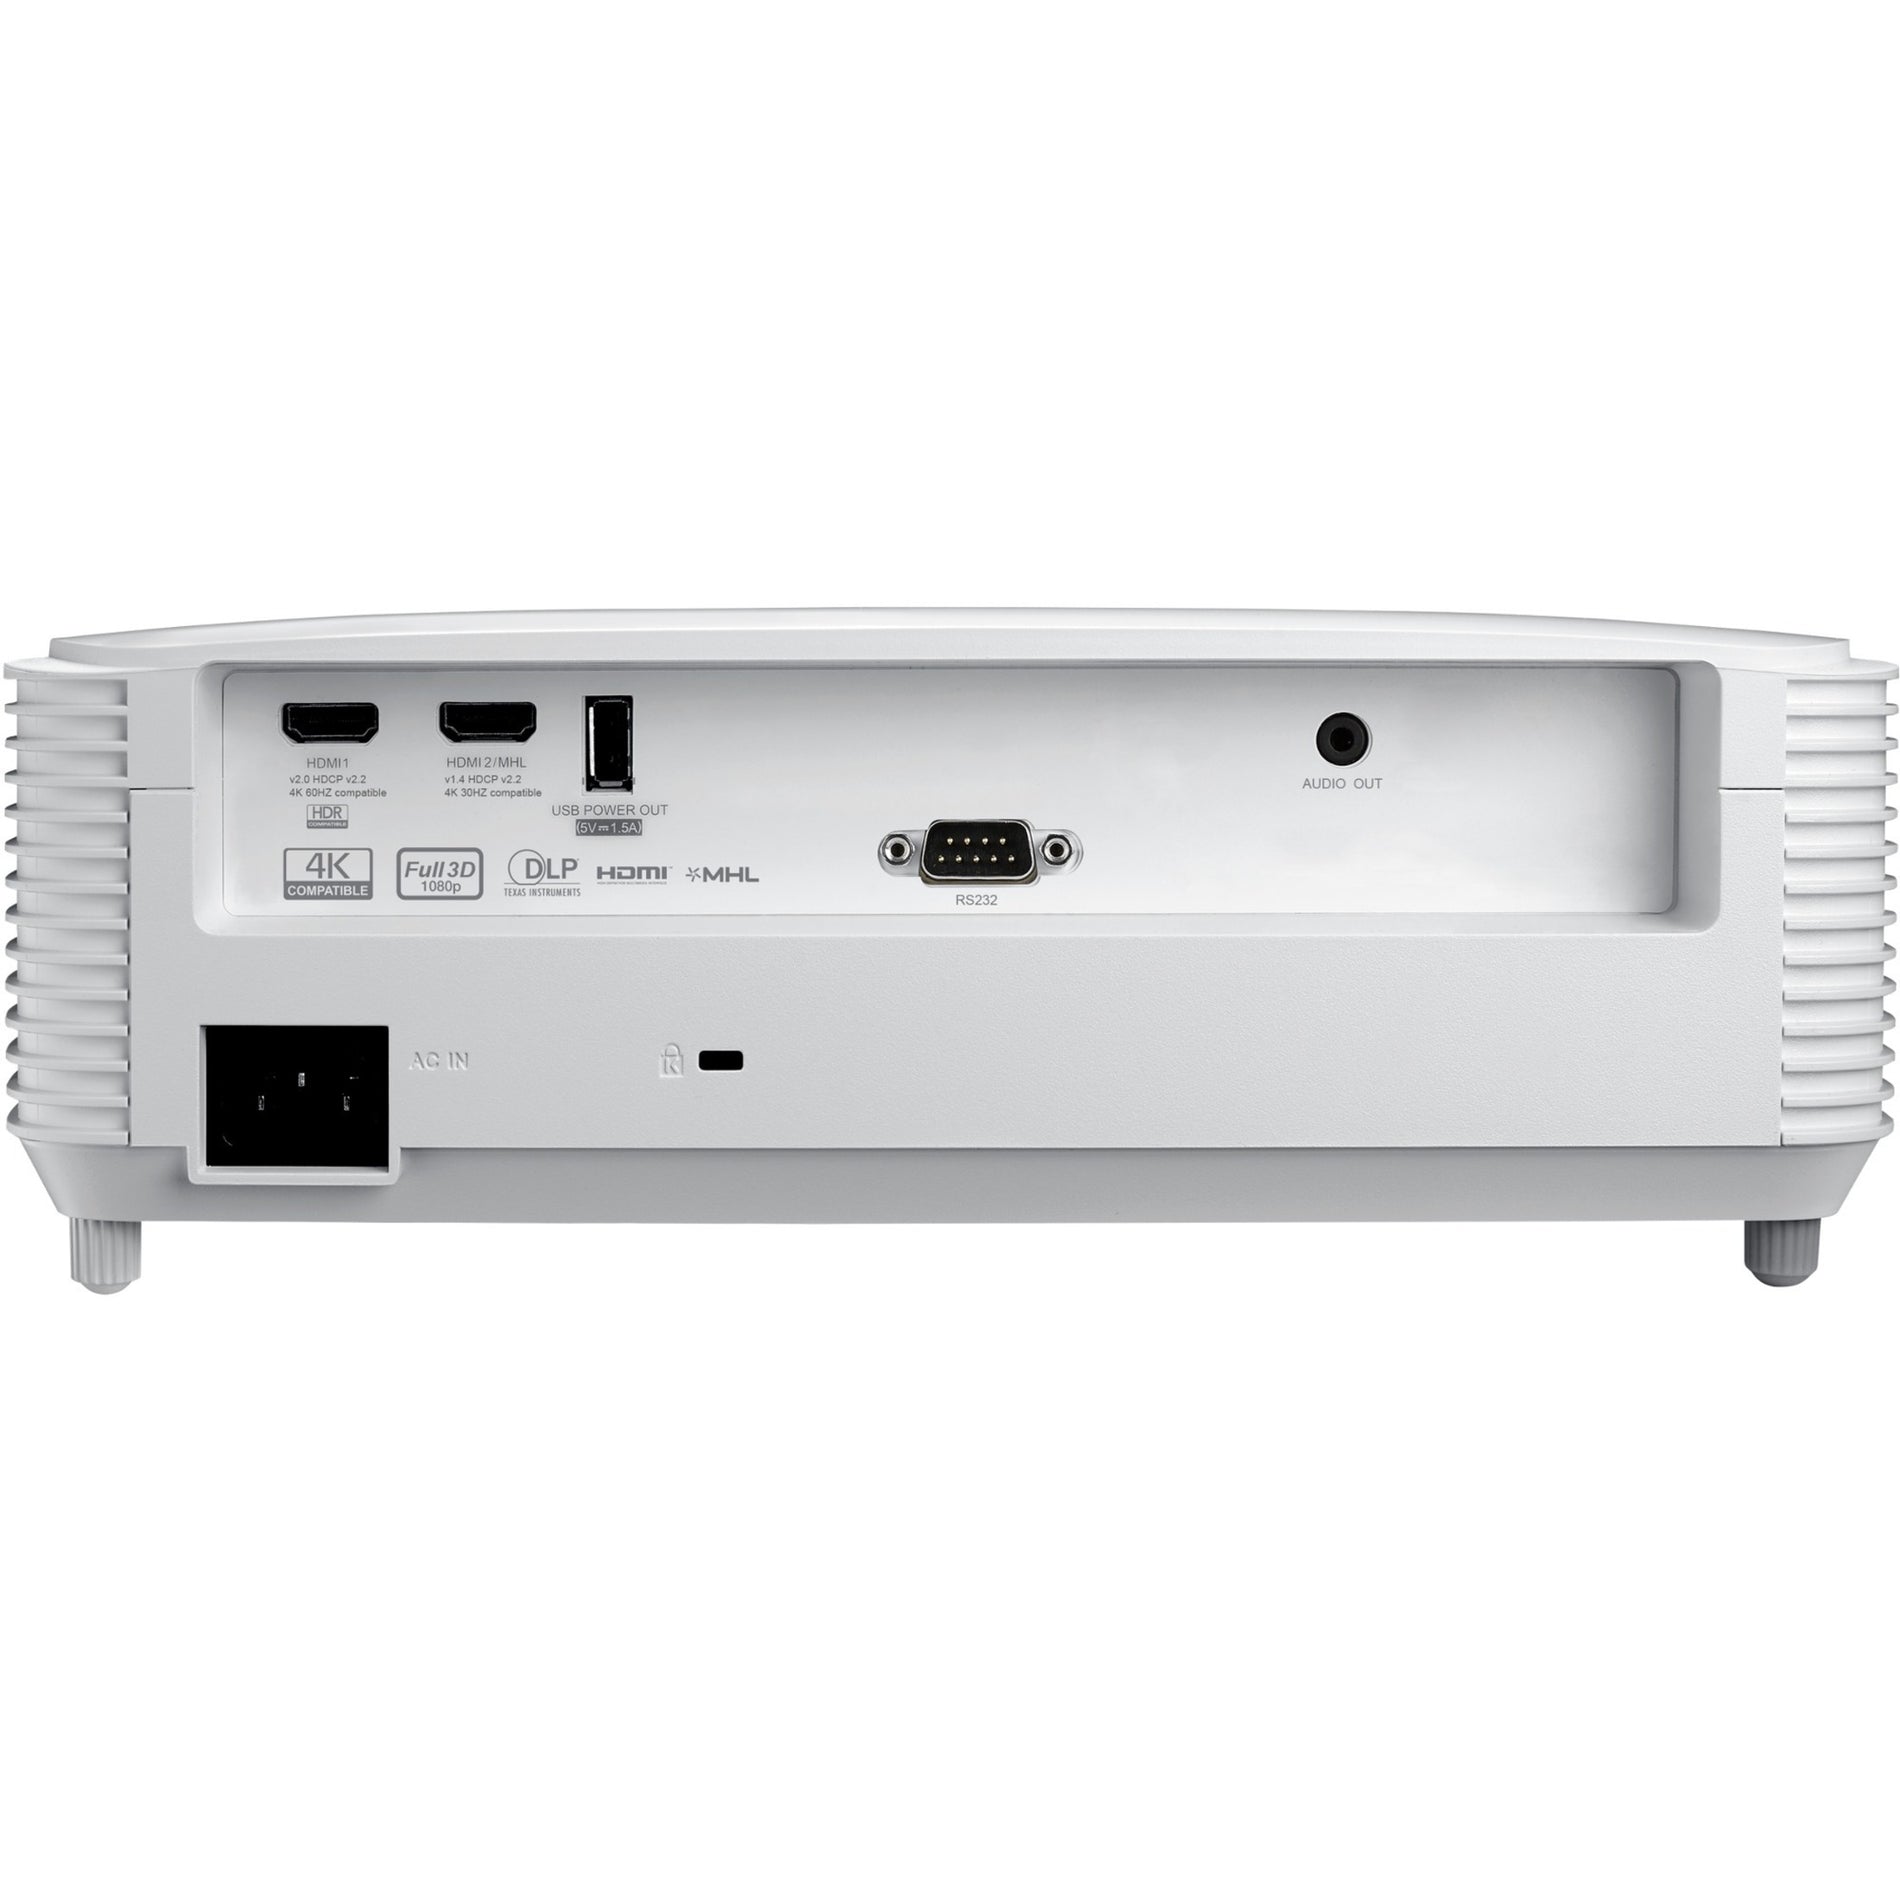 Optoma EH412STx 3D Short Throw DLP Projector - Full HD, 4000 lm, Portable, White [Discontinued]